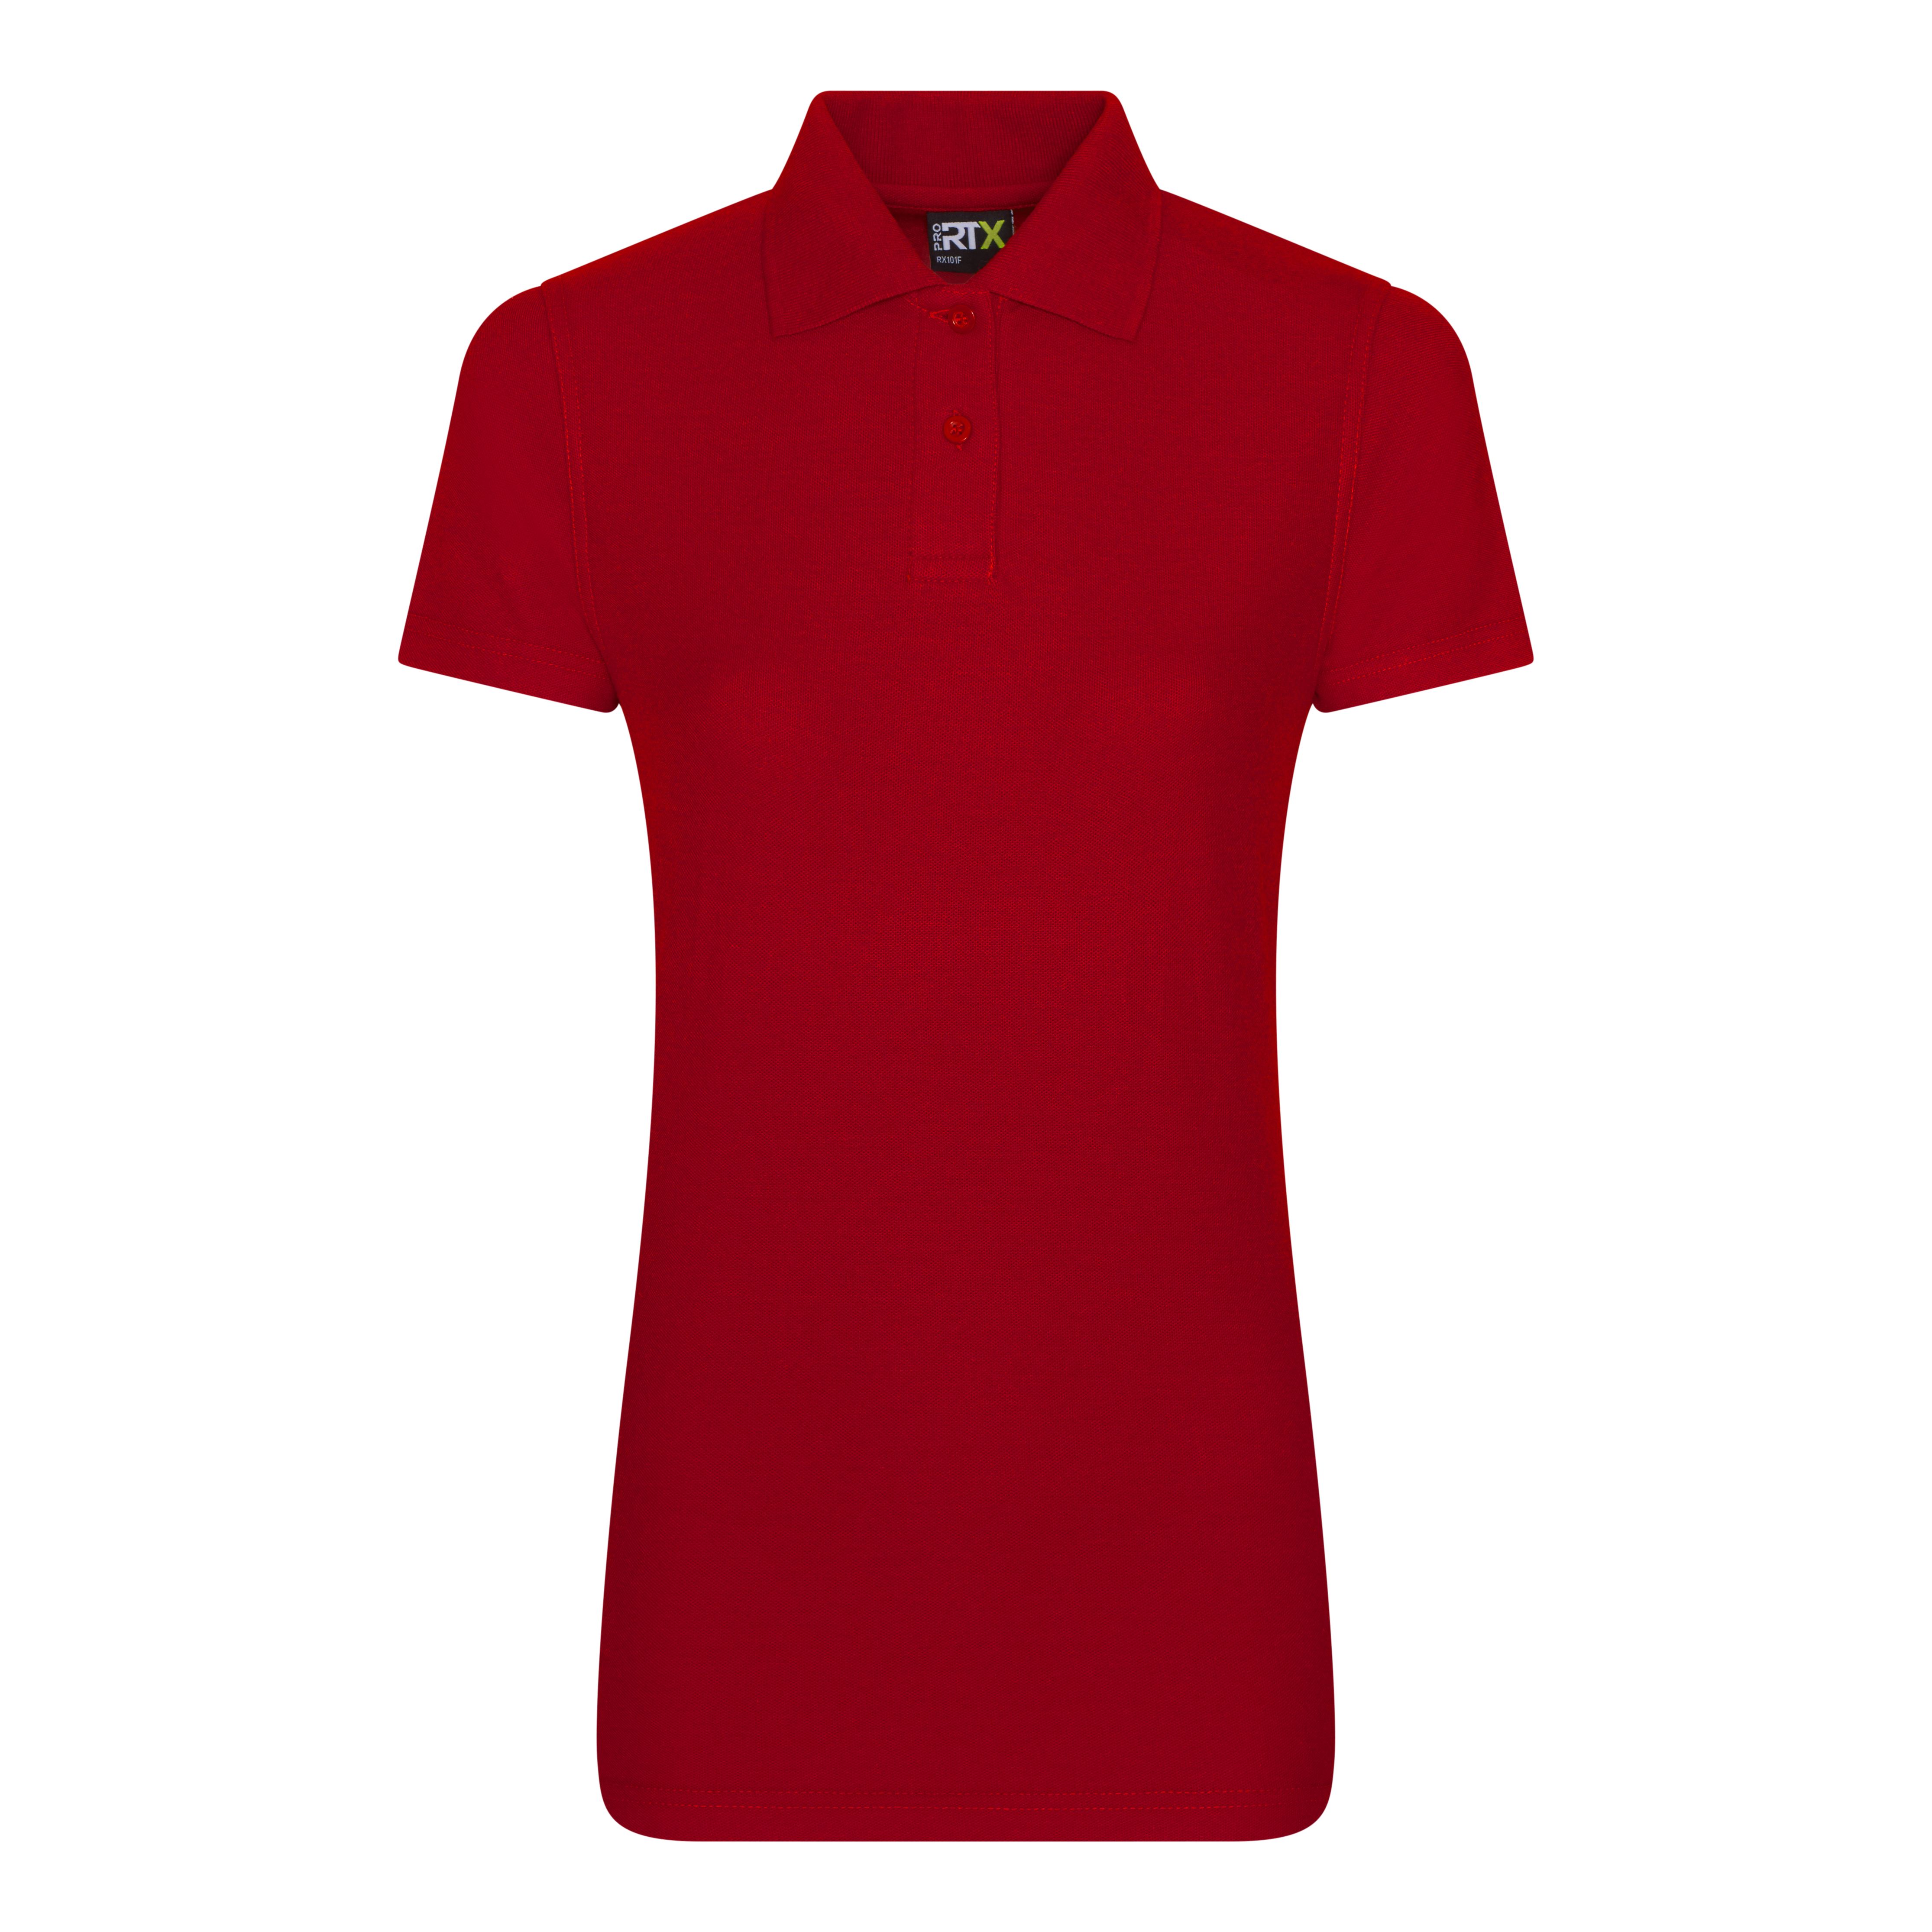 ax-httpswebsystems.s3.amazonaws.comtmp_for_downloadpro-rtx-ladies-pro-polo-red.jpg